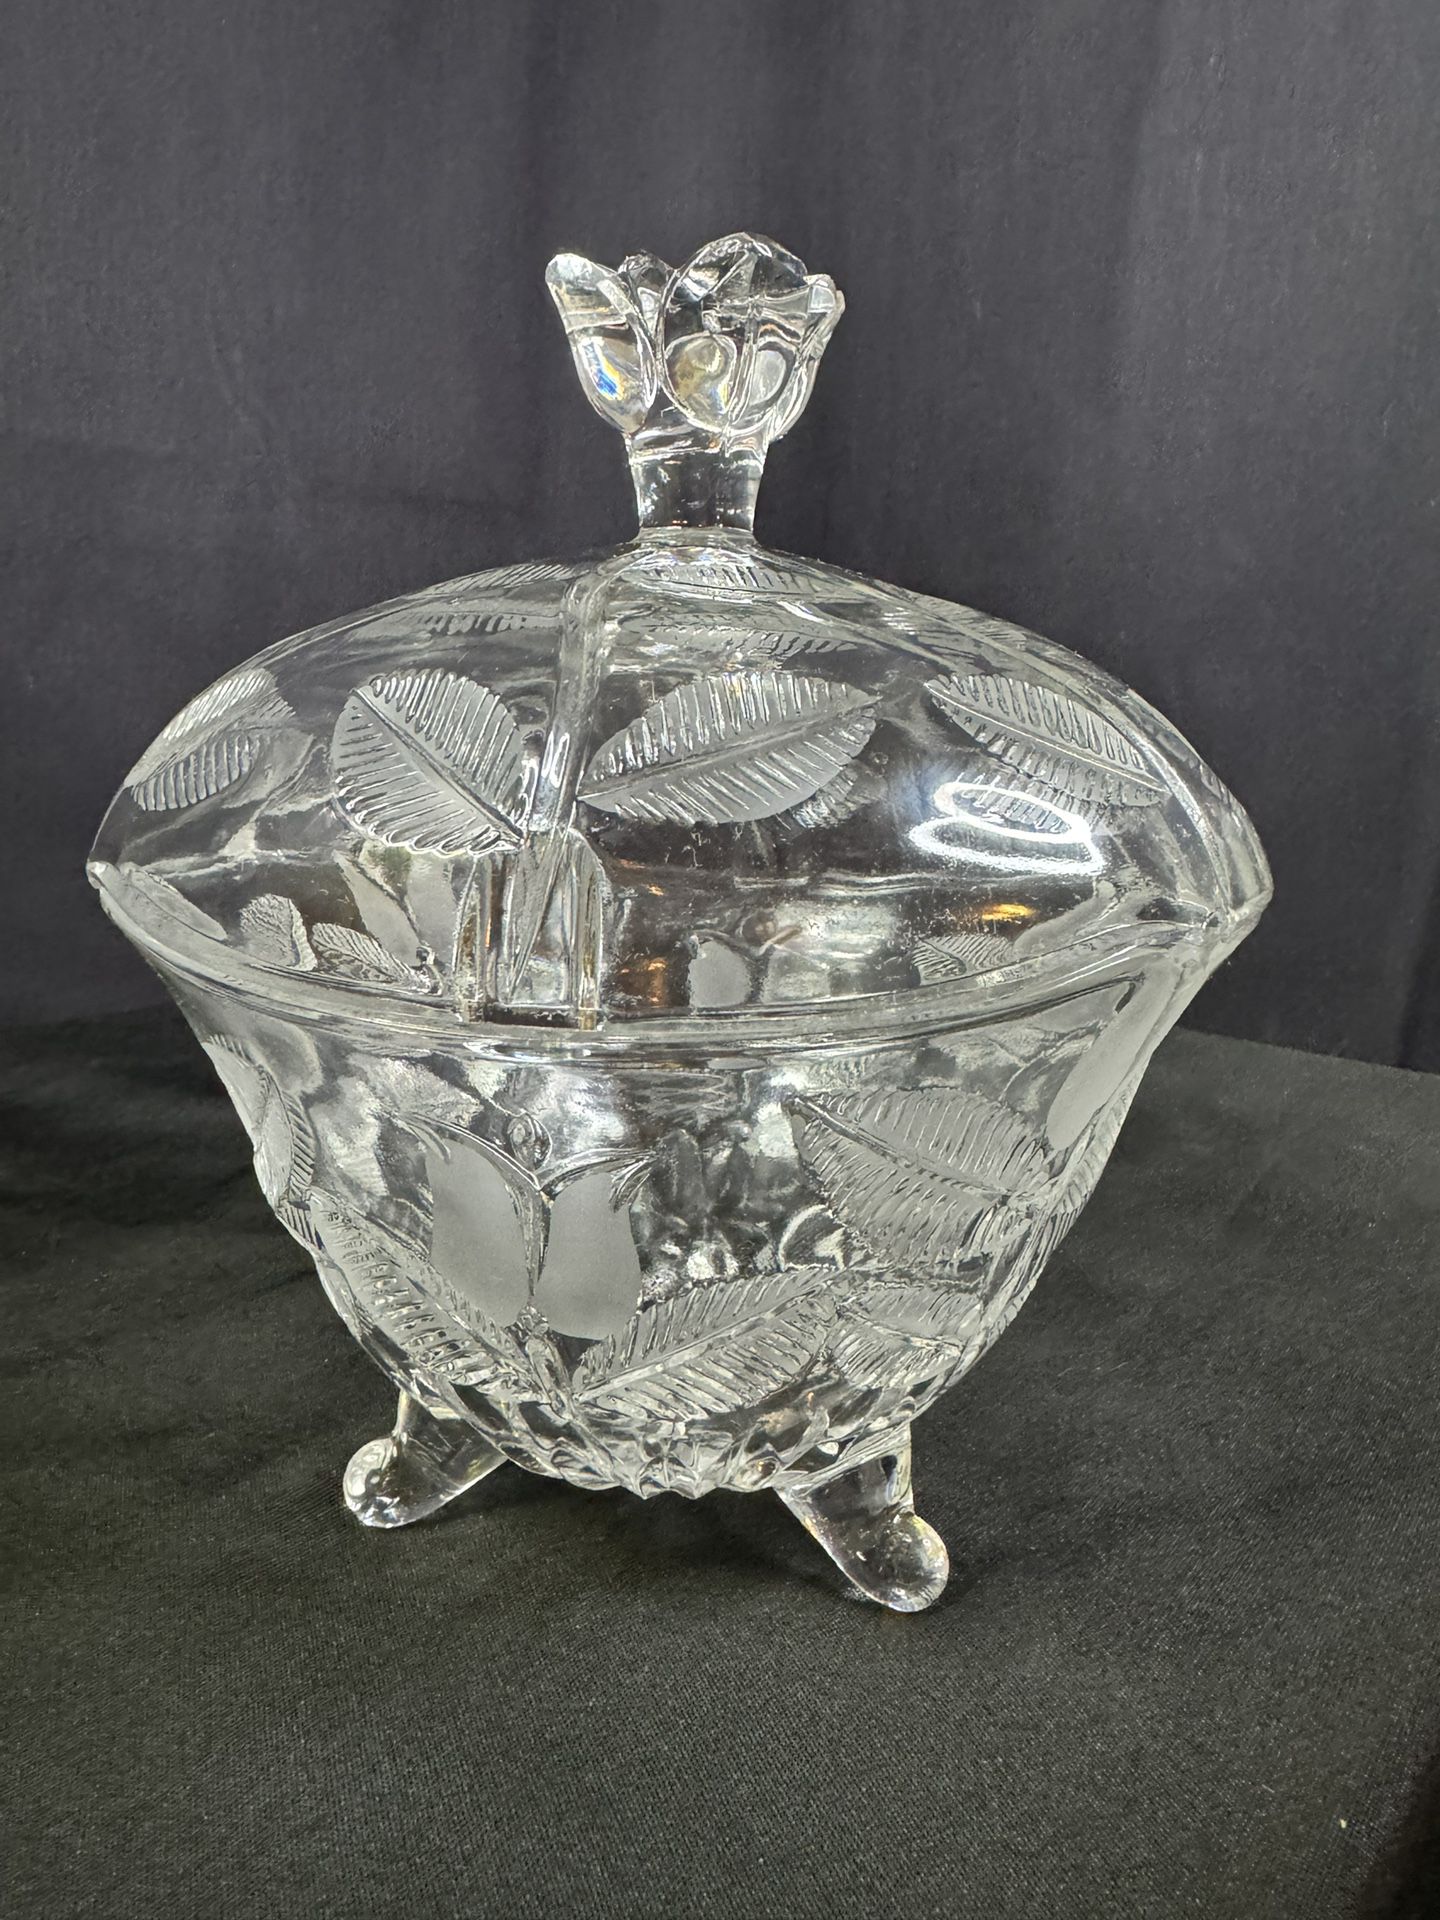 Fifth Avenue Handcut Full Lead Crystal Footed Dish With Lid Made In Poland